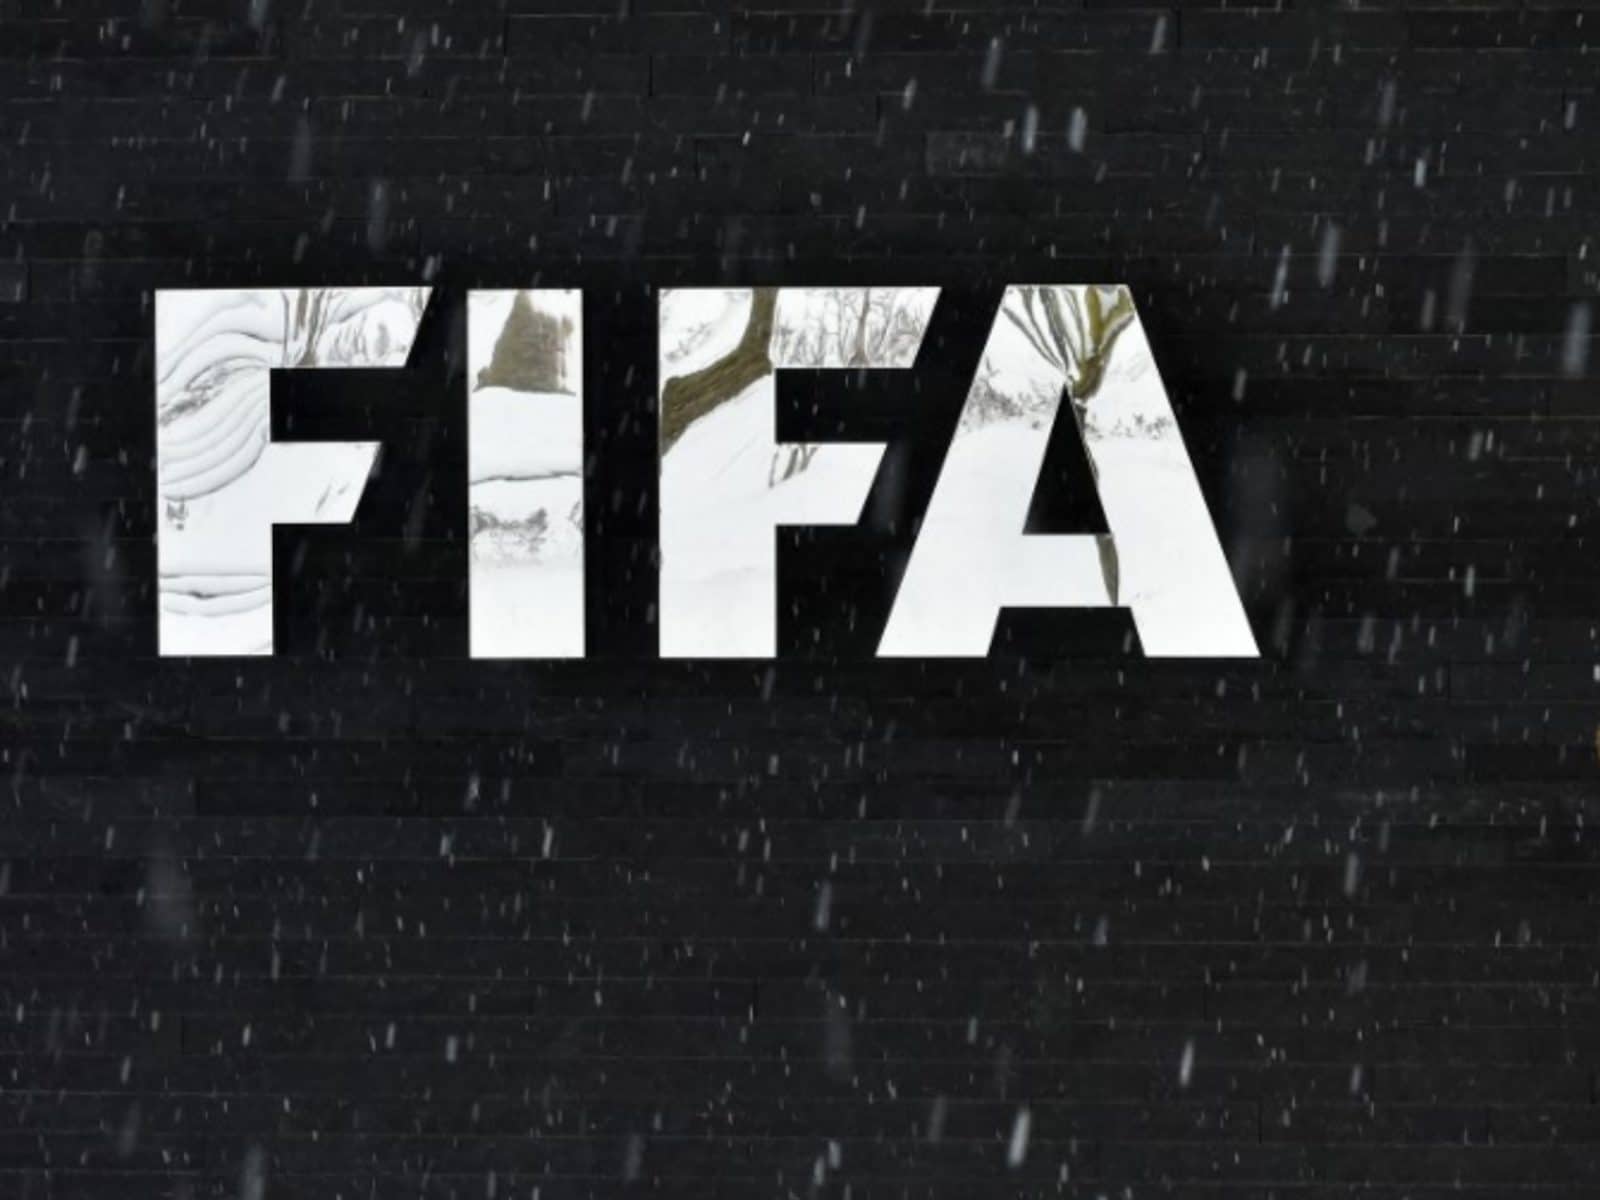 What is FIFA+? The new football streaming service where you can watch  matches and documentaries